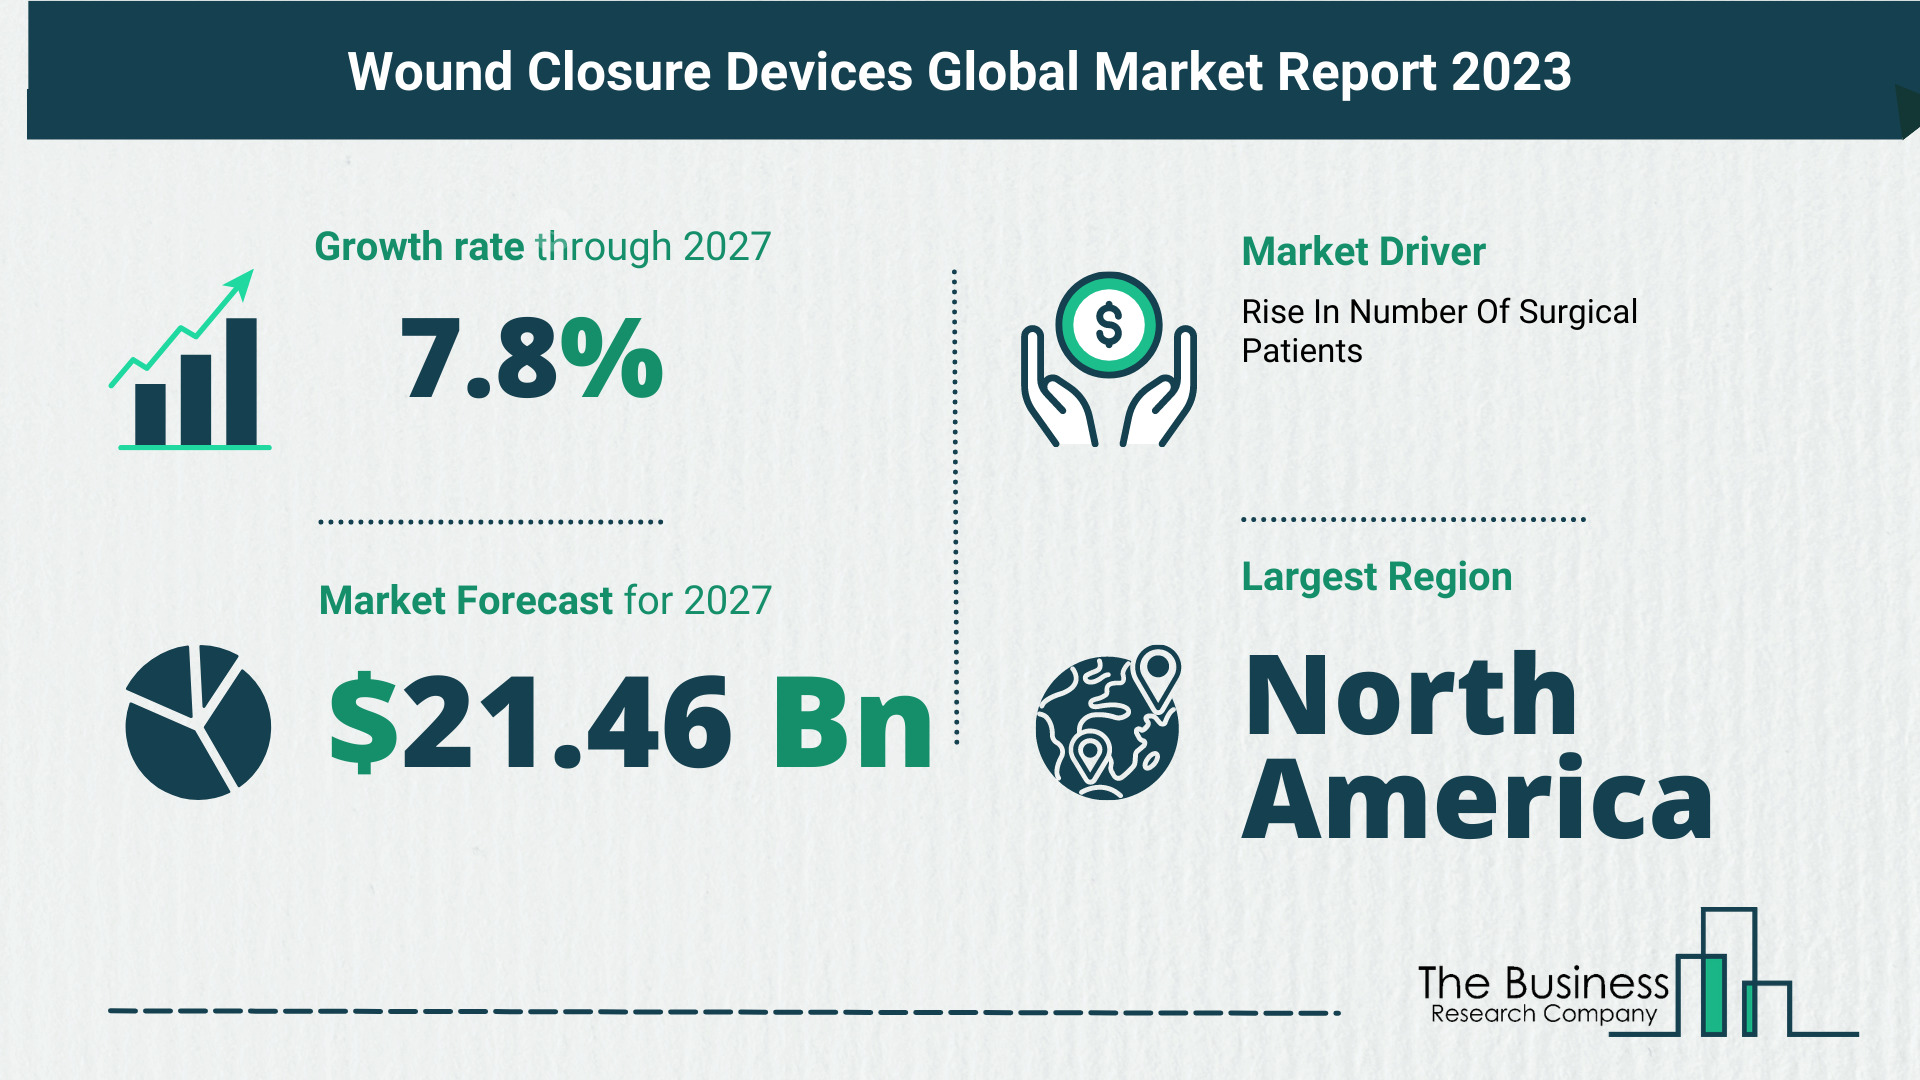 Global Wound Closure Devices Market Analysis: Estimated Market Size And Growth Rate